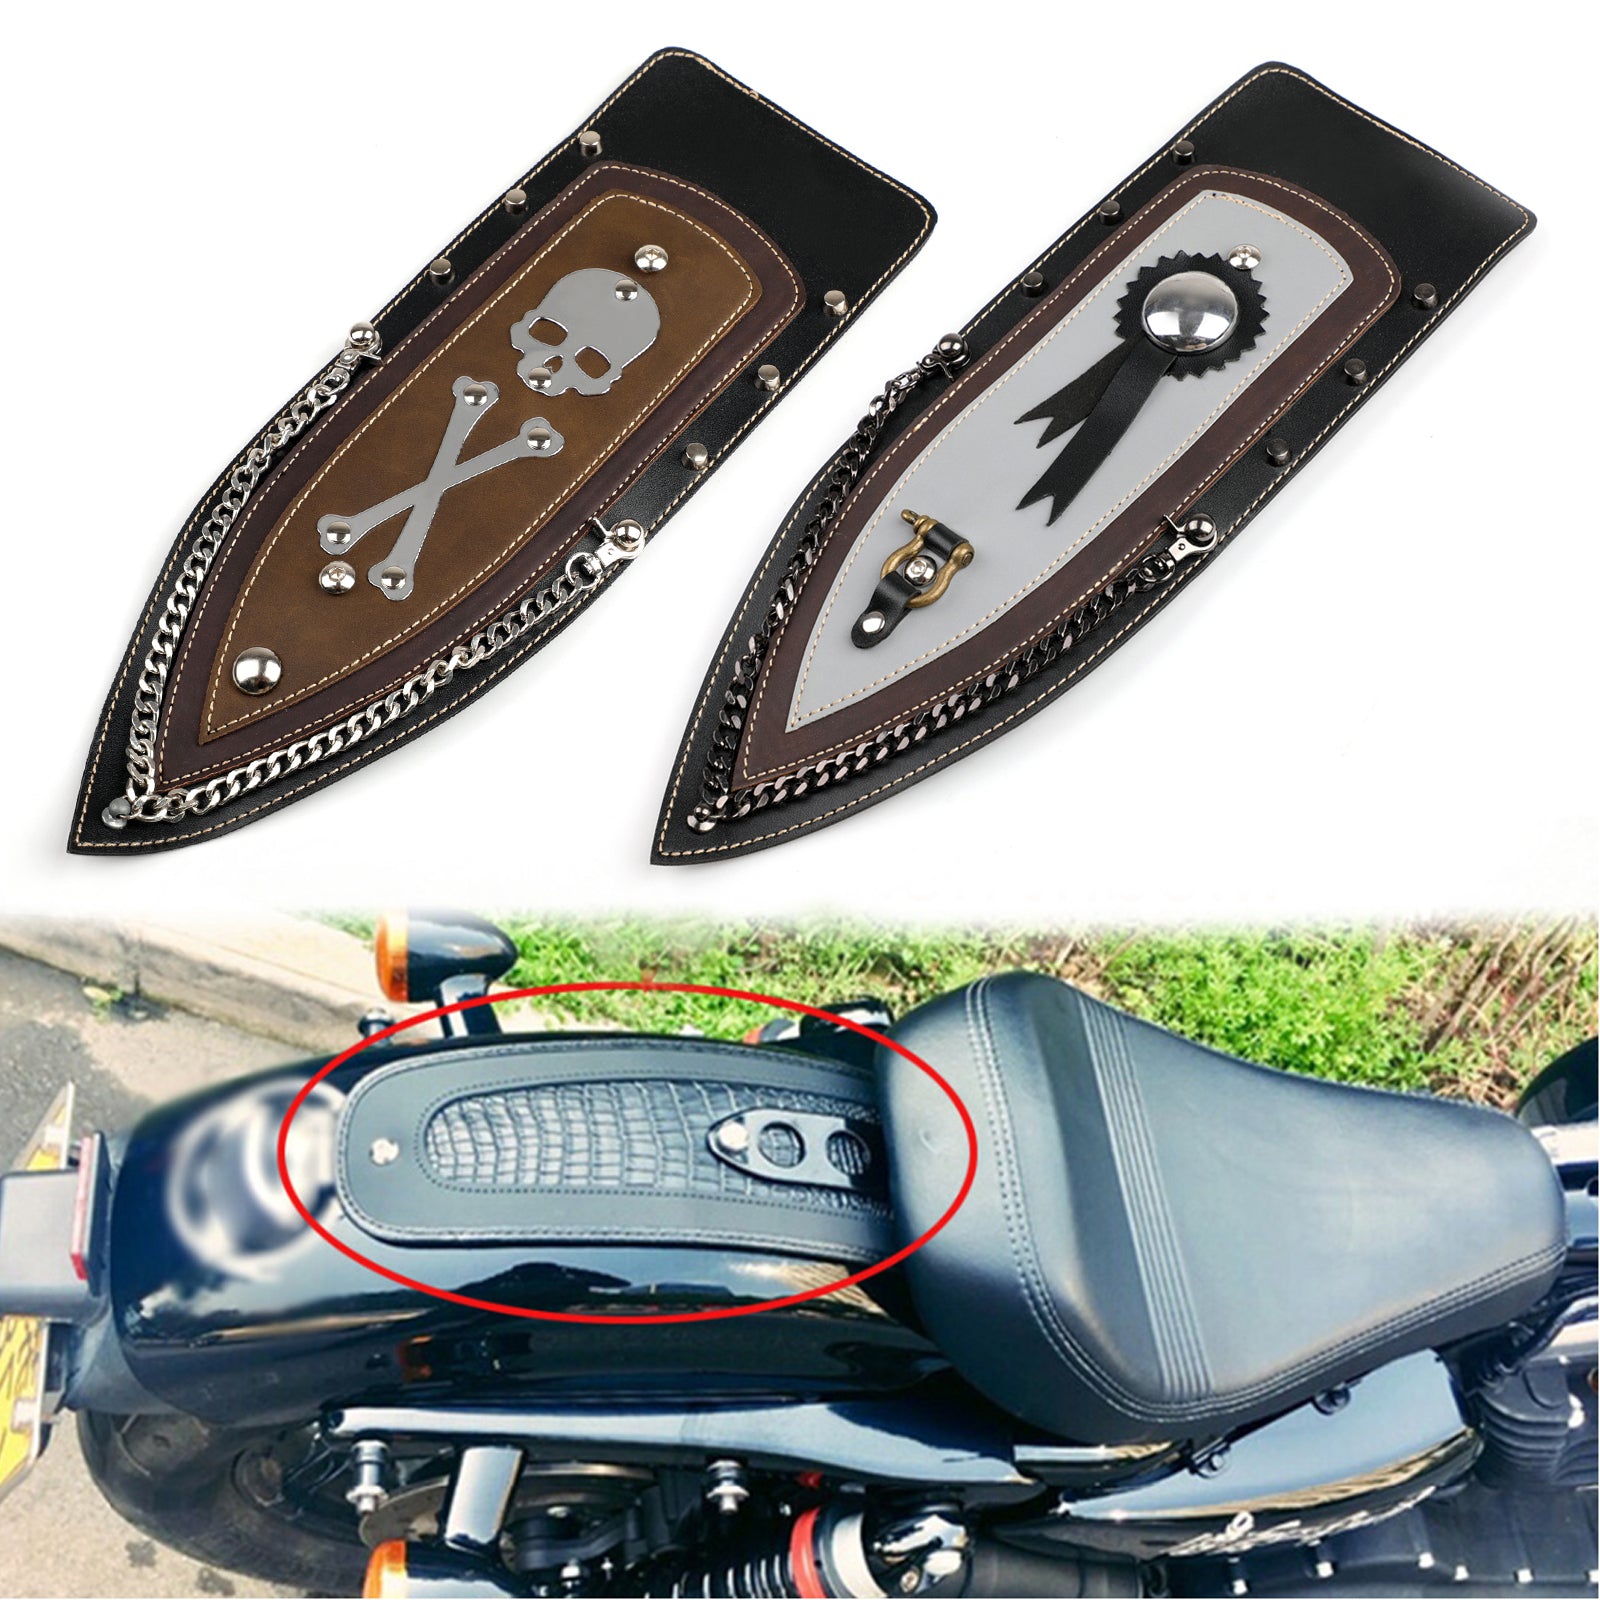 Leather Plain Rear Fender Bib Cover For 04-16 Harley Sportster XL883 Solo Seat Generic